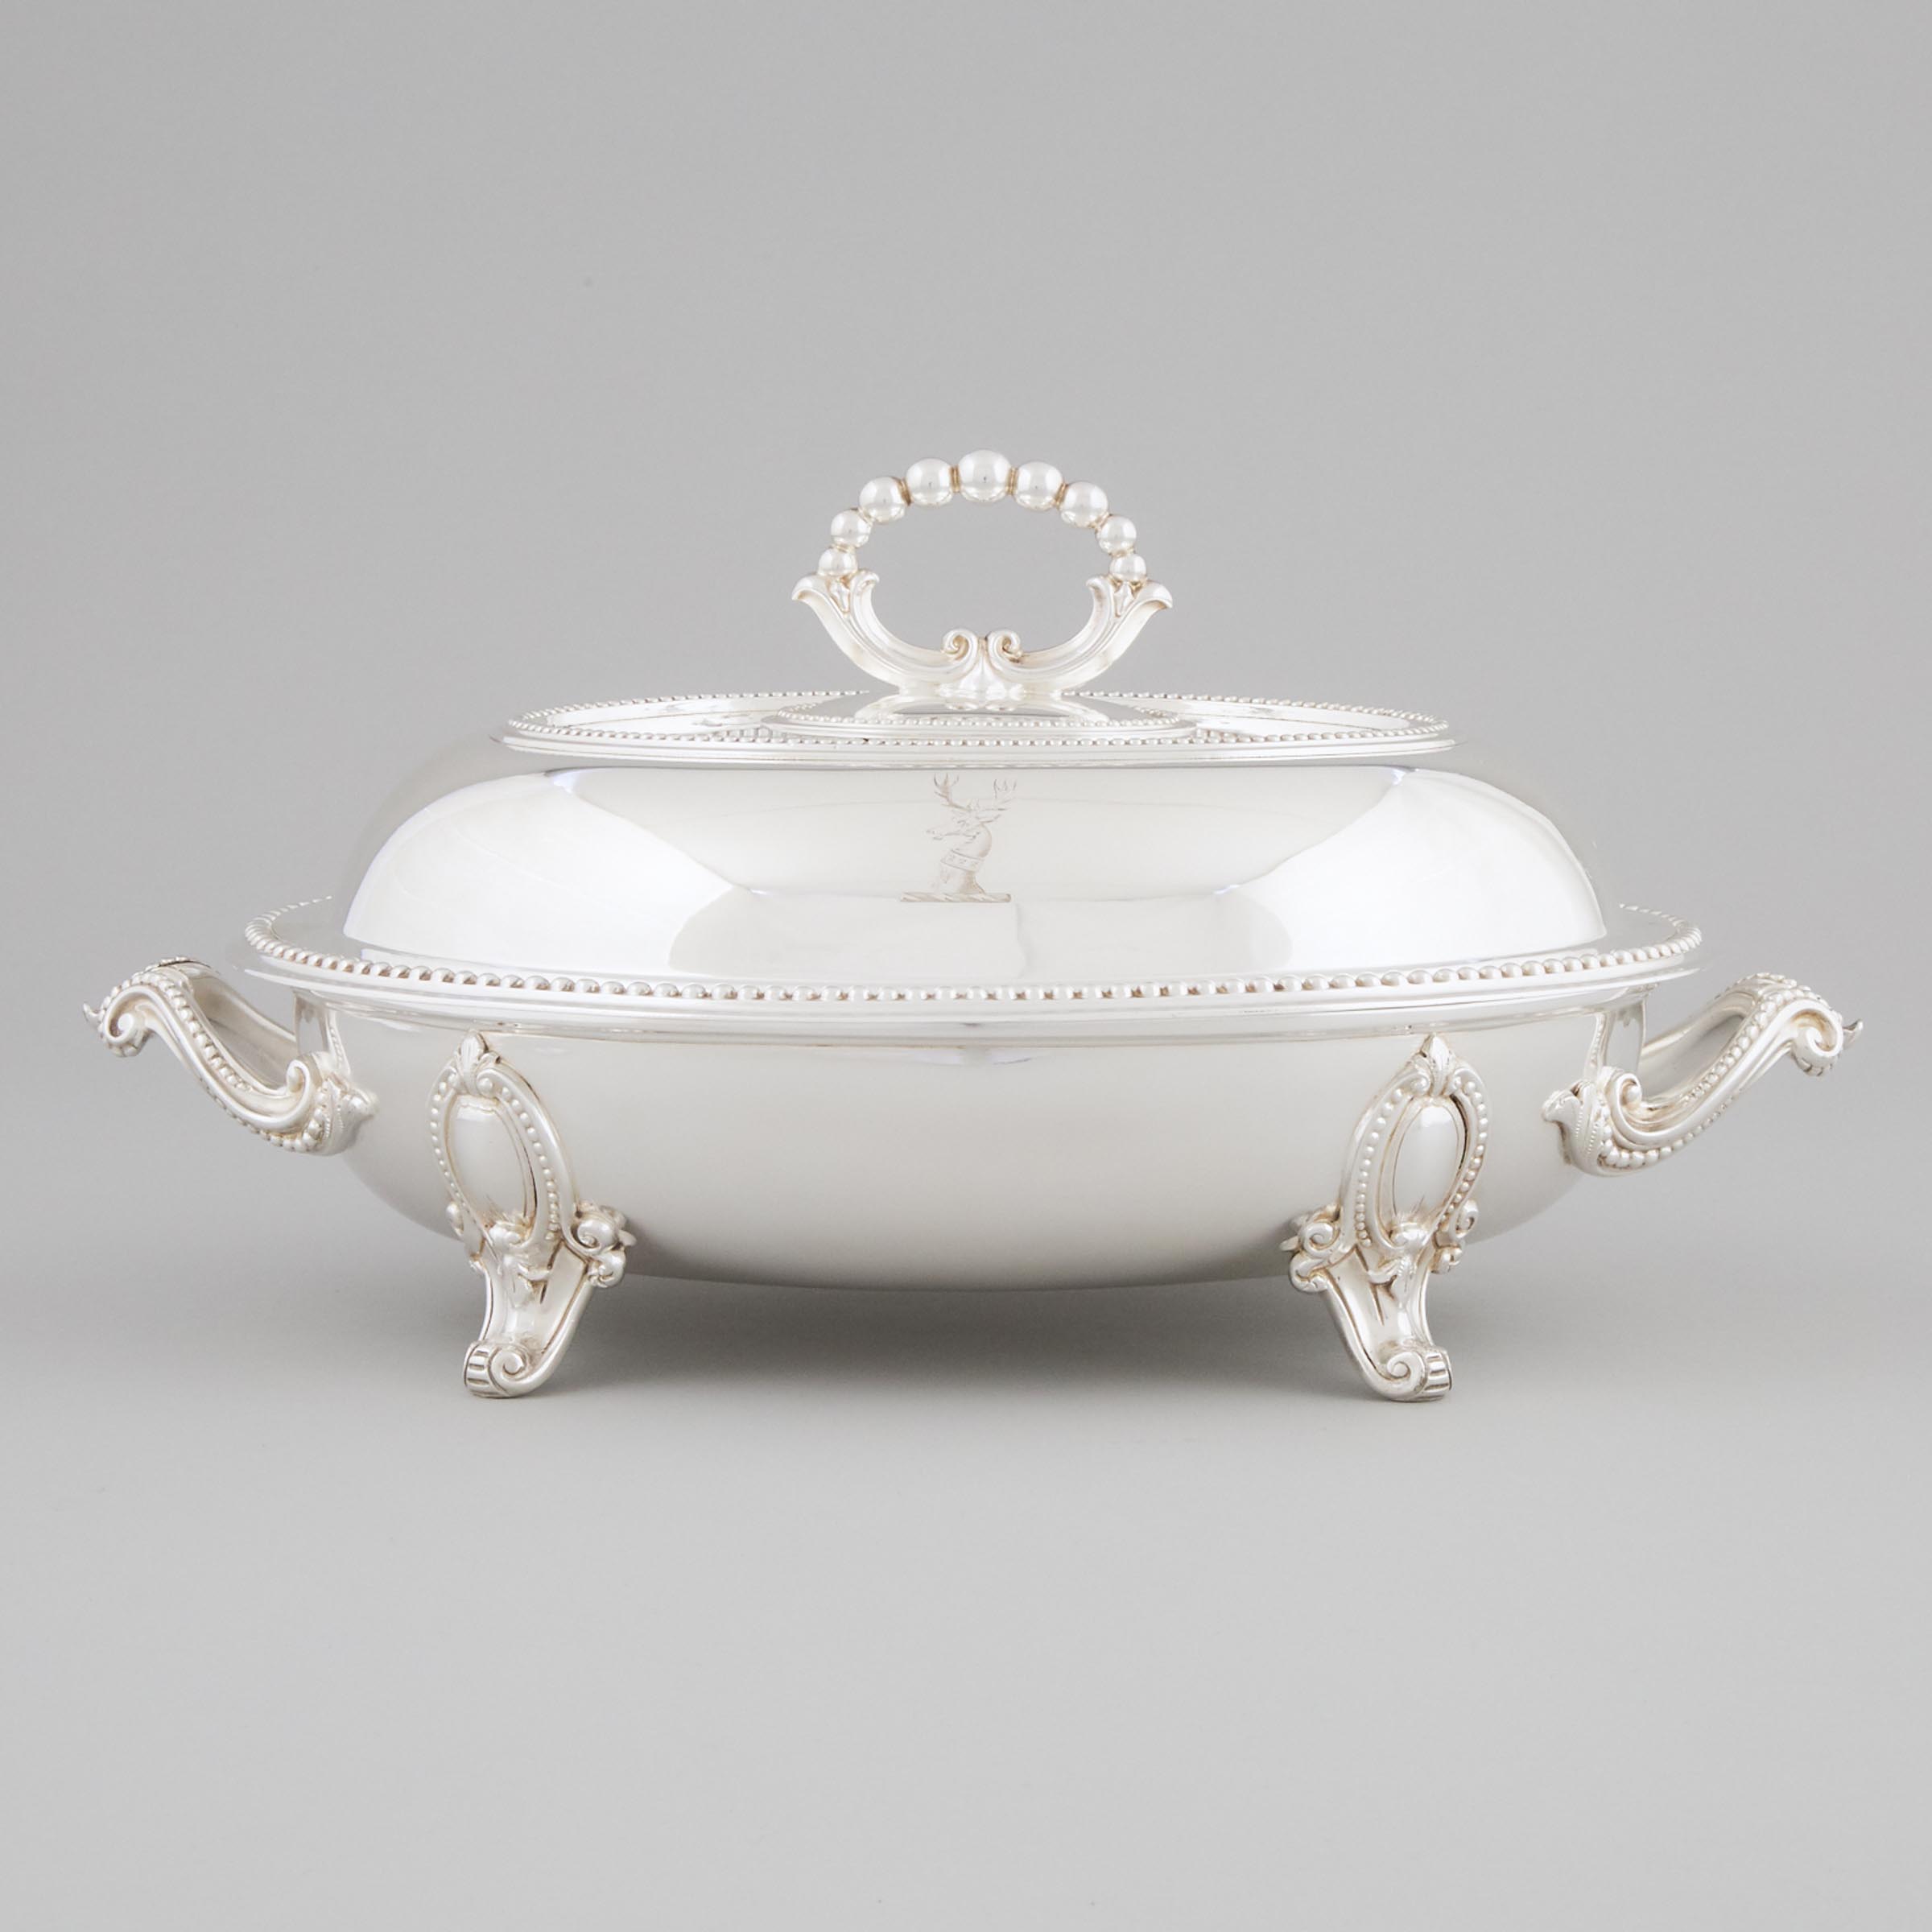 English Silver Plate Oval Entrée Dish with Cover and Warming Base, early 20th century